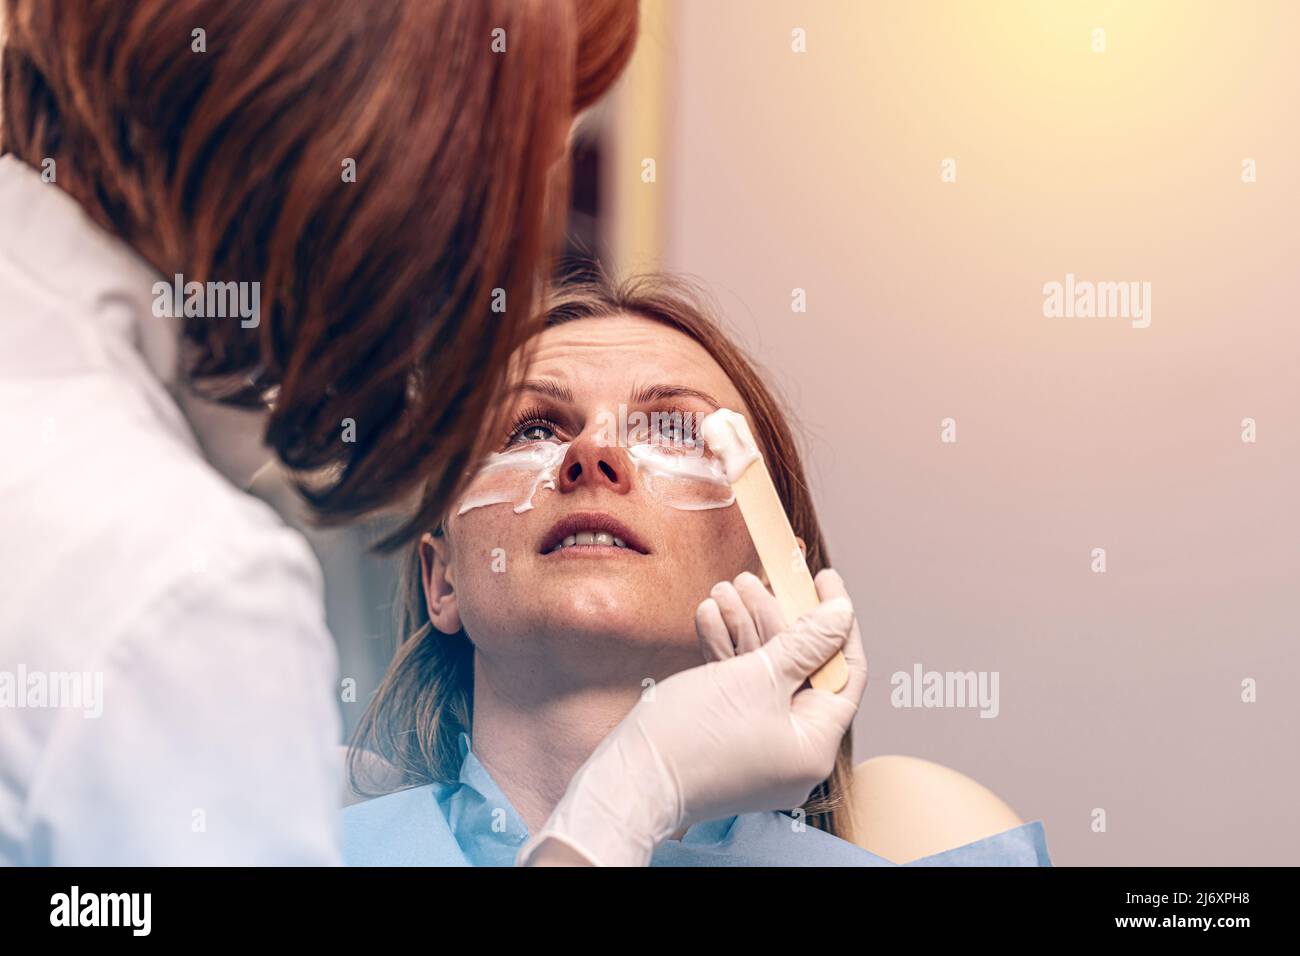 Local anesthesia before anti aging eye treatments Stock Photo